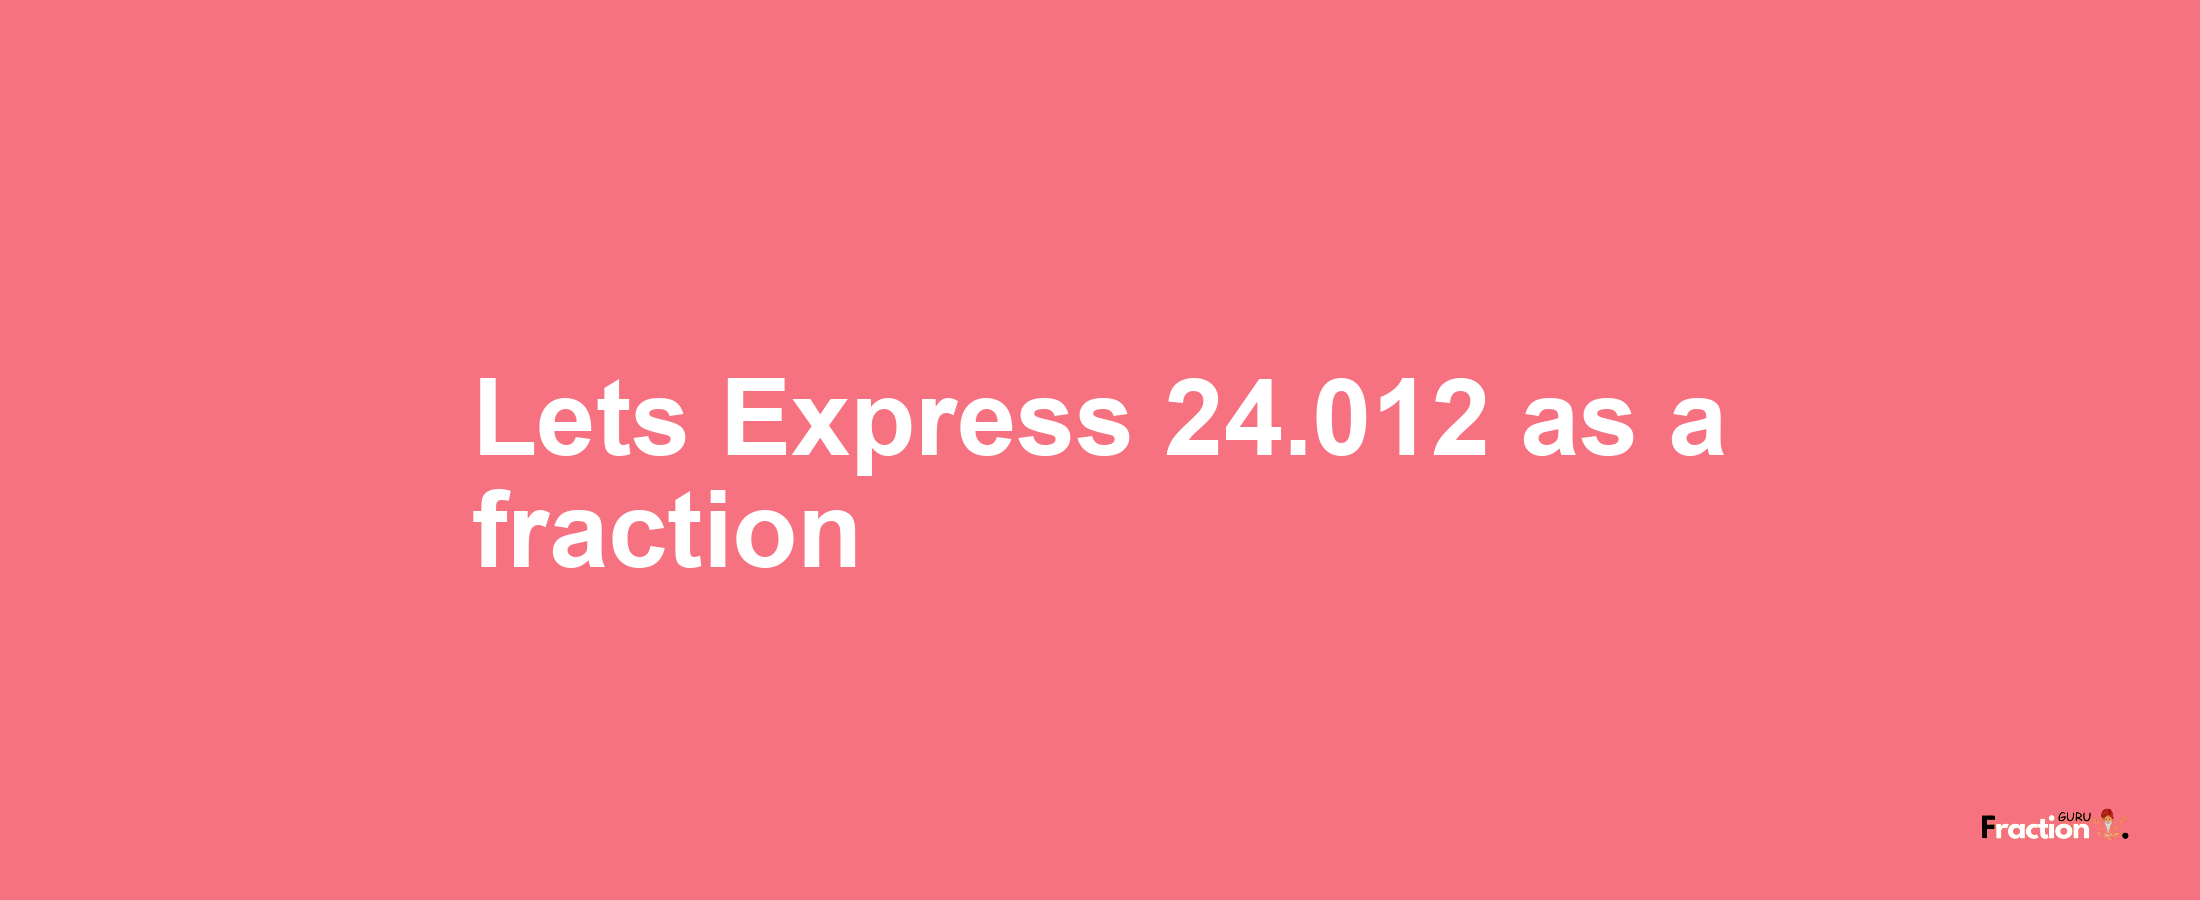 Lets Express 24.012 as afraction